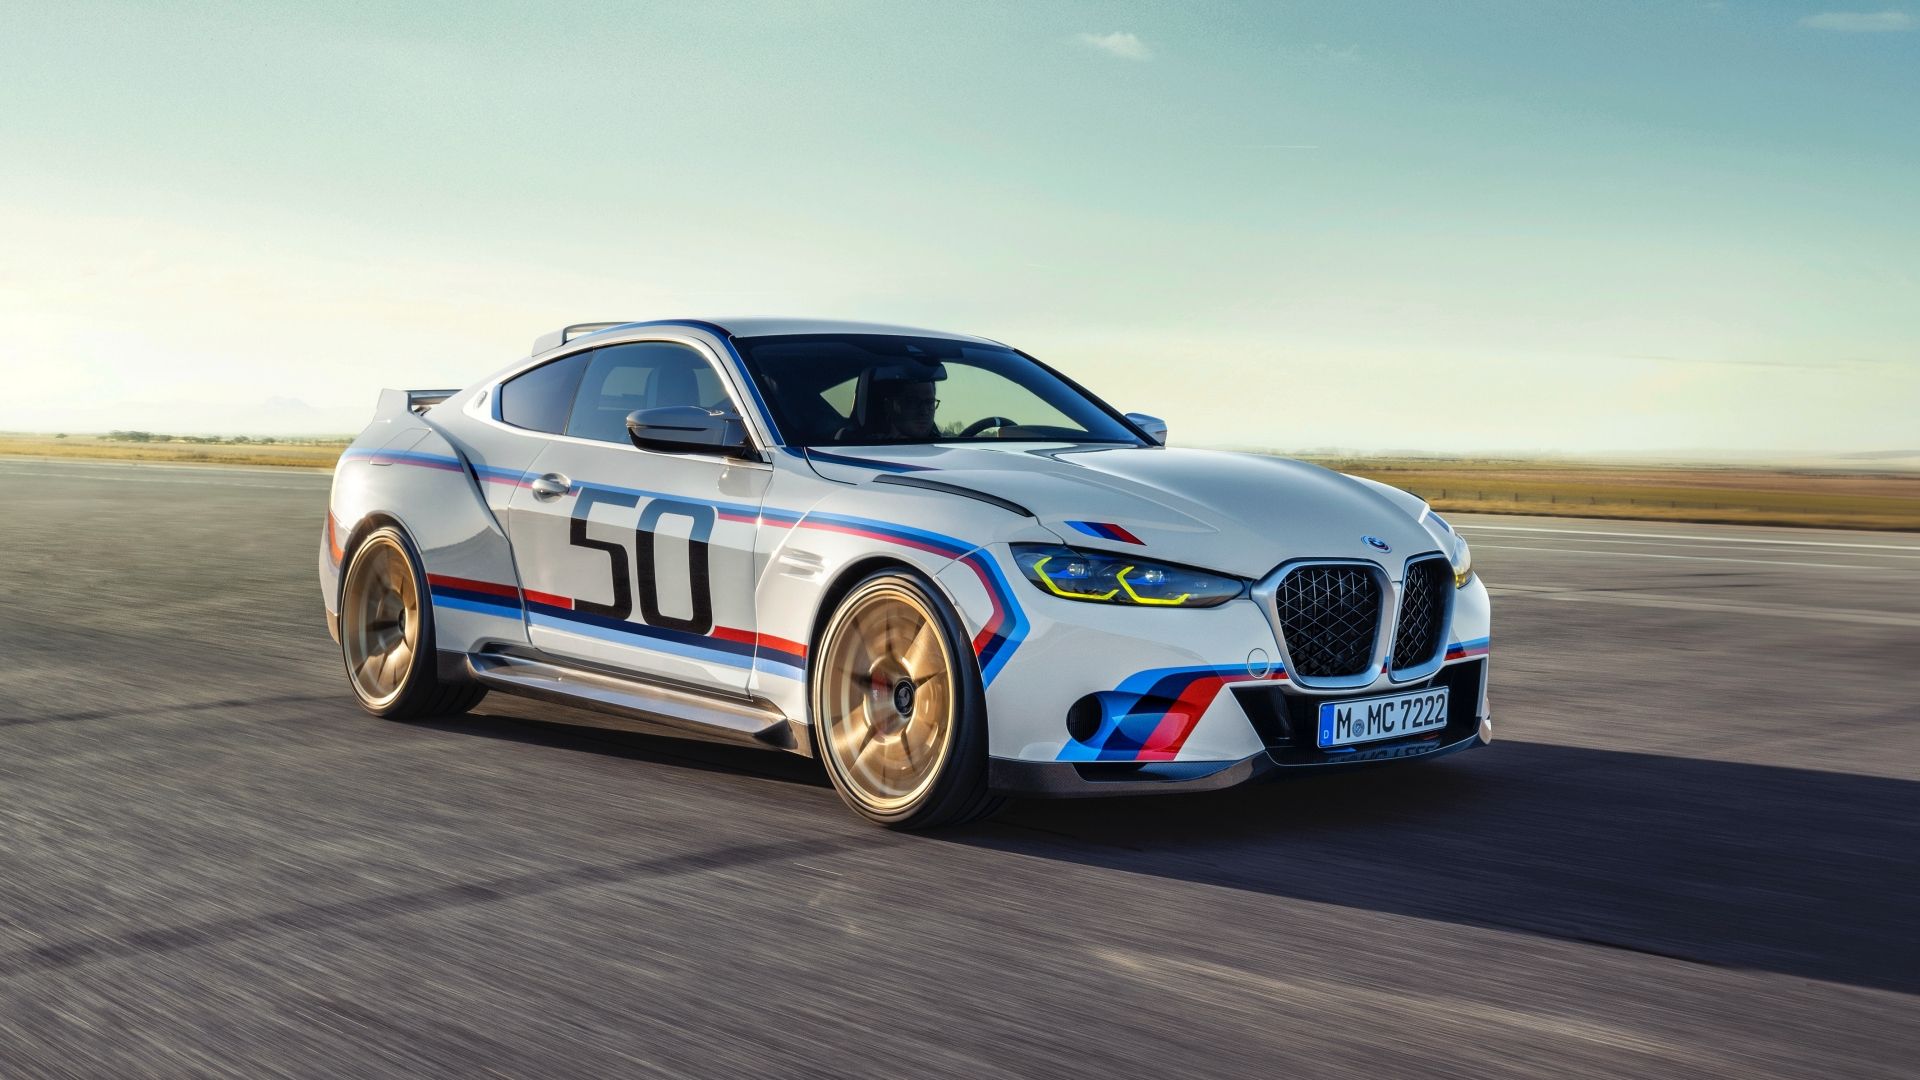 50 Jahre BMW M: The BMW M3 and BMW M4 edition models marking the